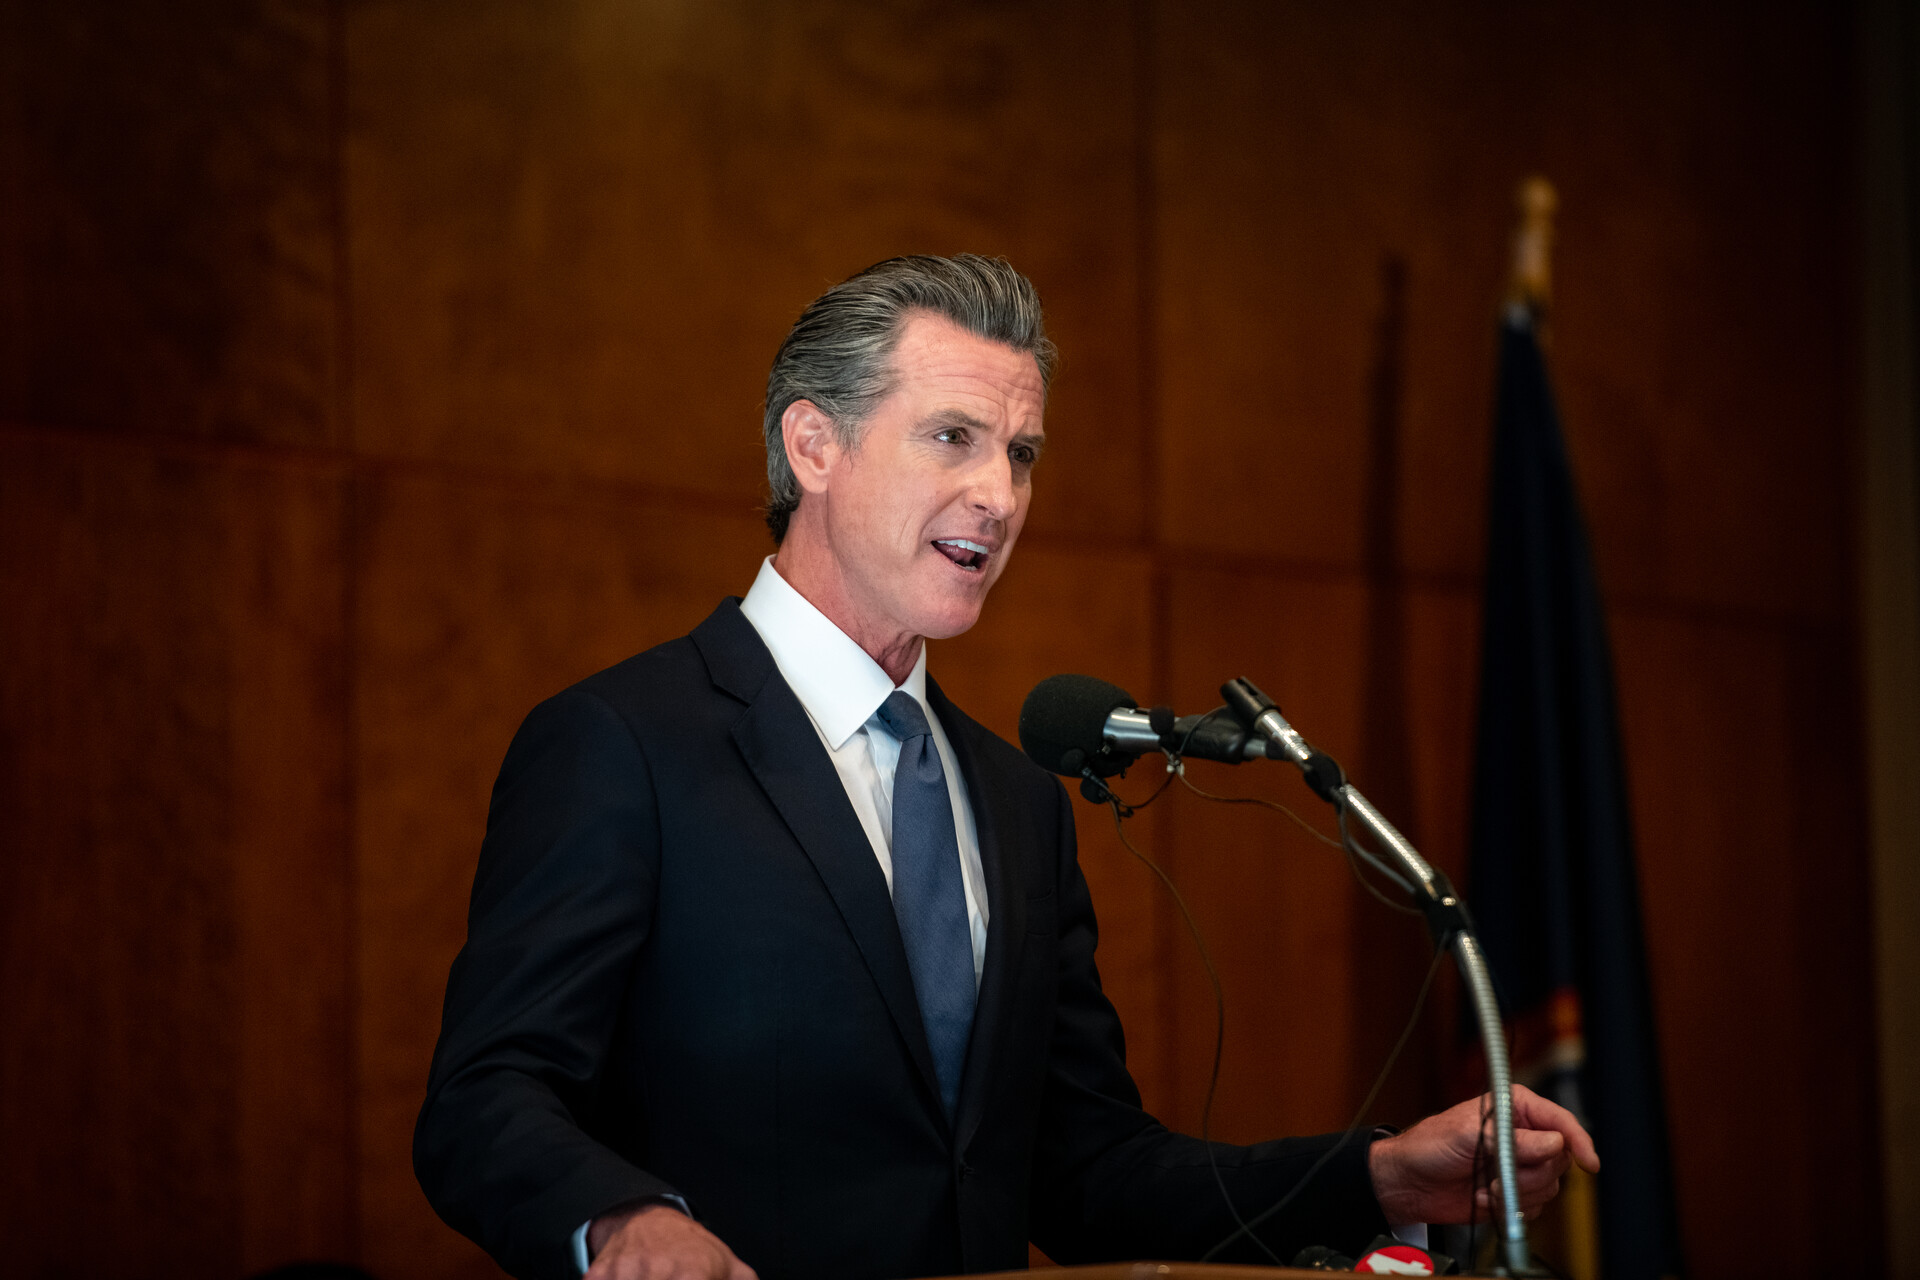 California Gov. Gavin Newsom is pictured speaking from a podium inside a conference room.